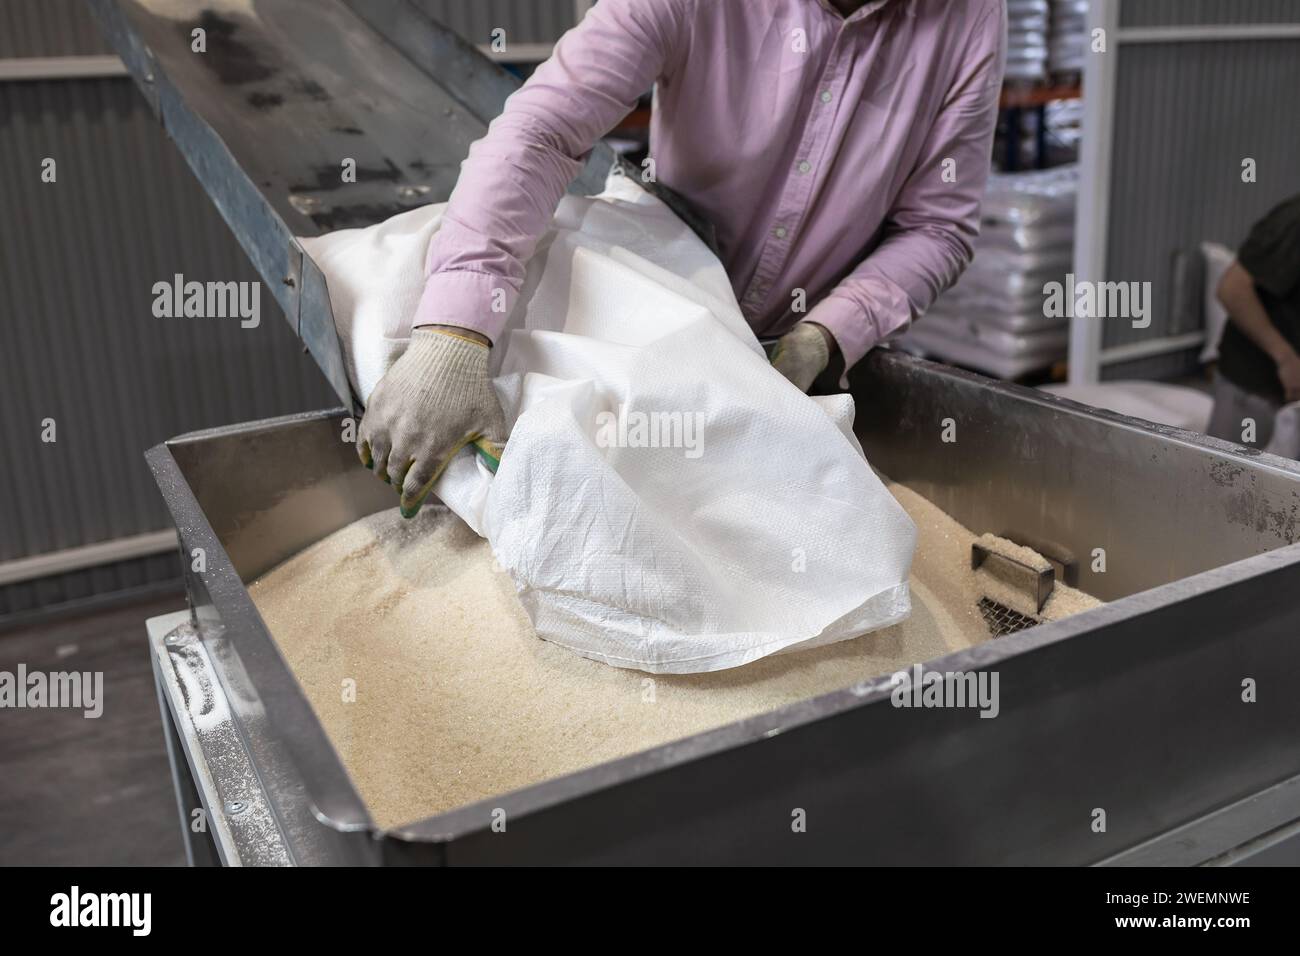 A worker pours a bag of sugar onto a conveyor line for further processing Stock Photo